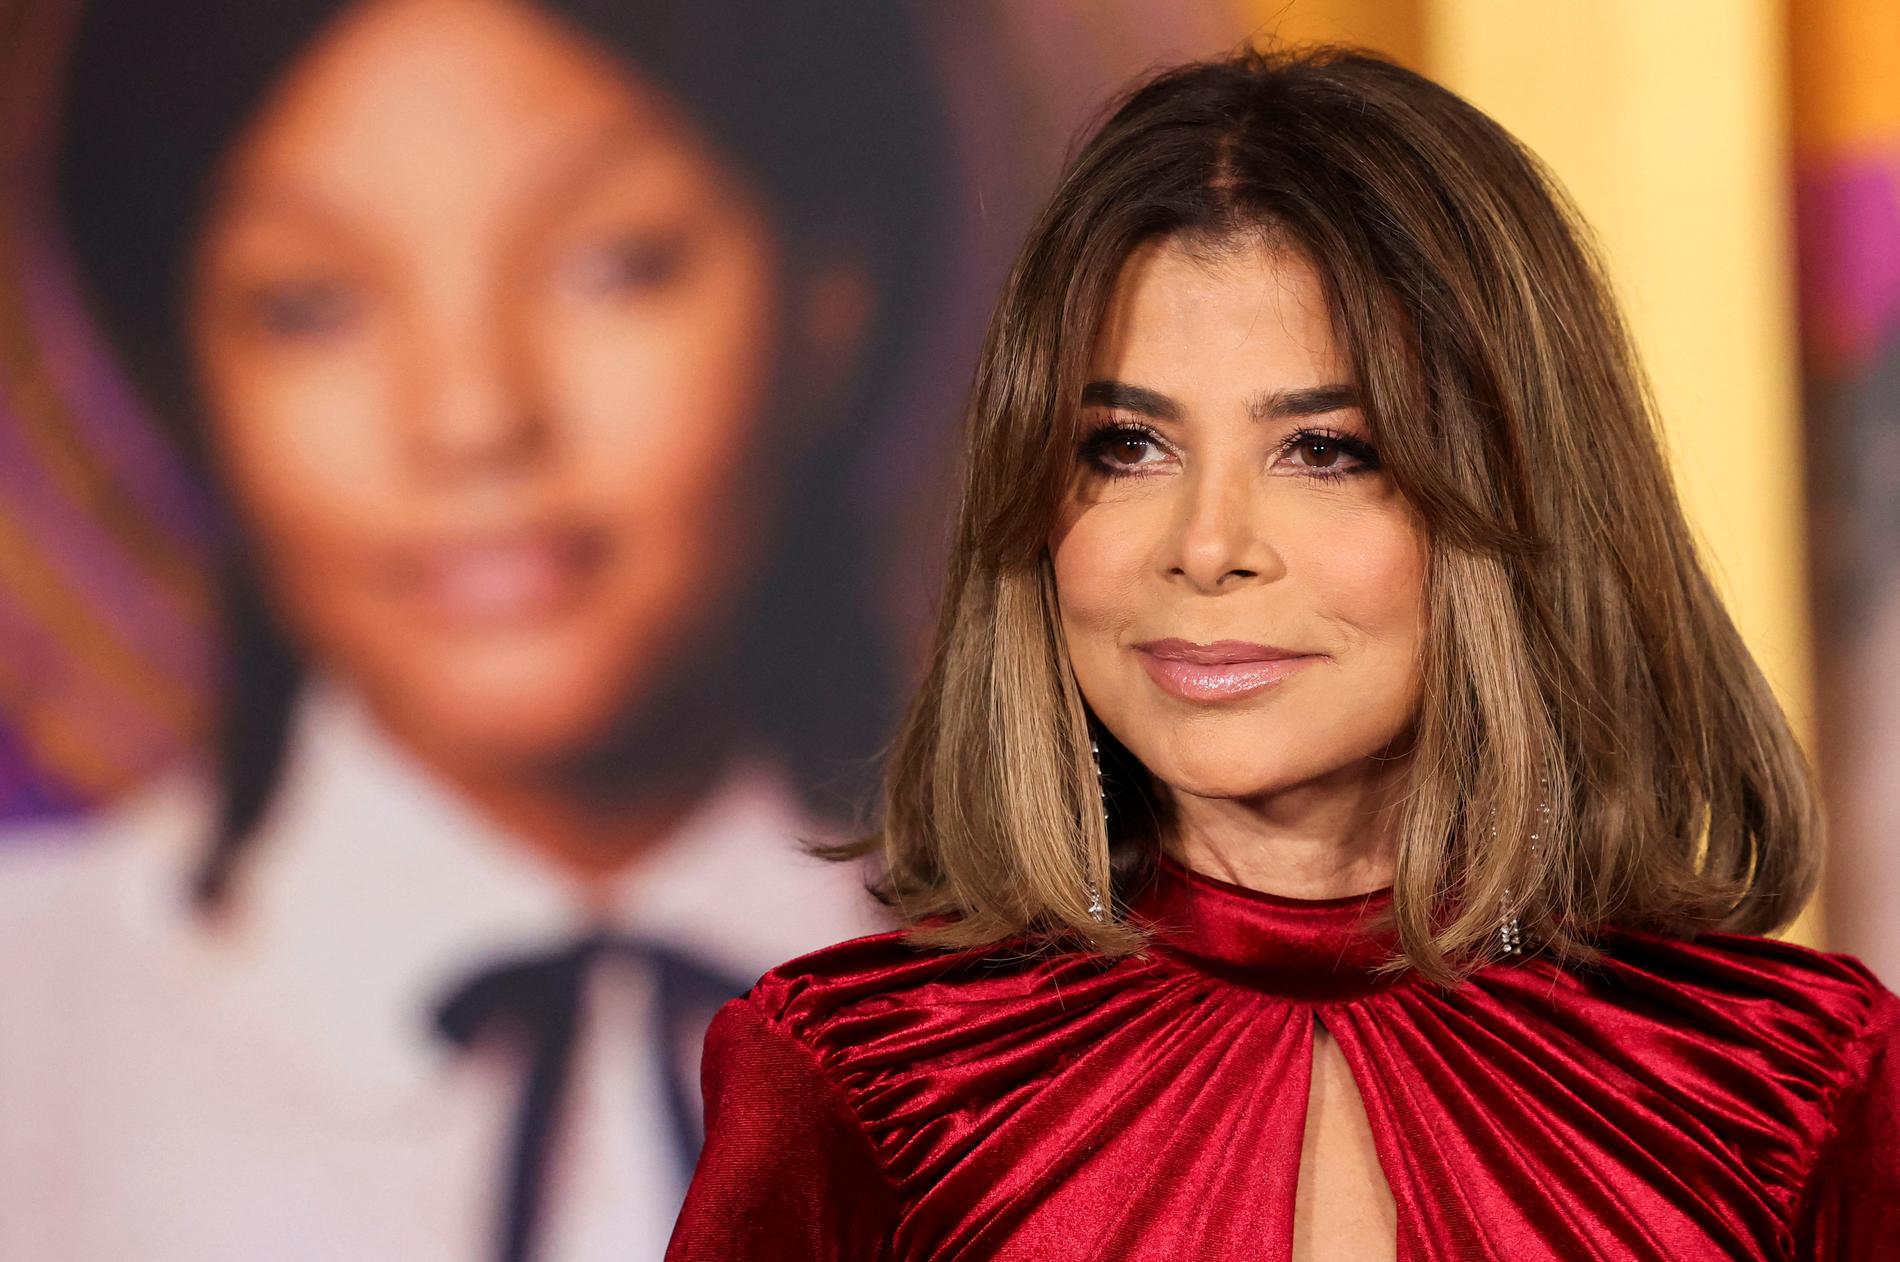 The scary career break: Paula Abdul, 61, is pictured on the red carpet at a movie premiere 